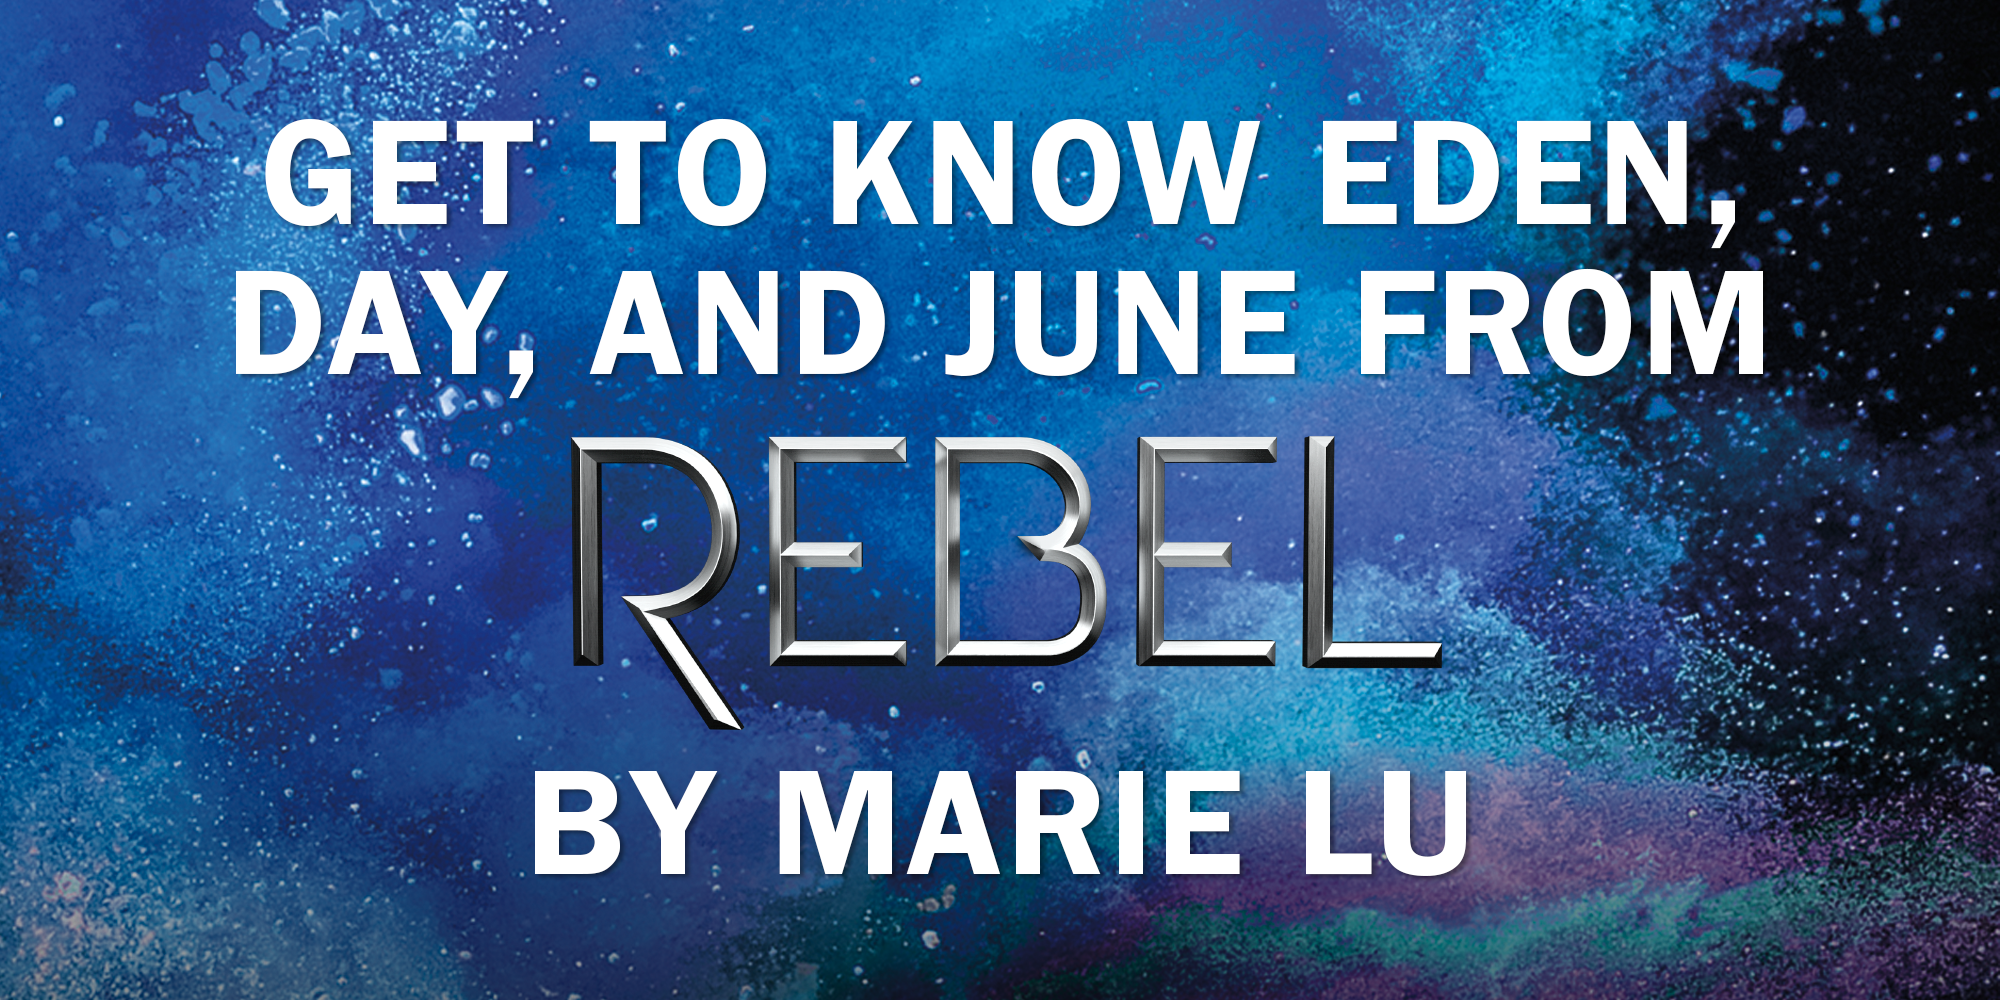 Get to Know Eden, Day, and June from Rebel by Marie Lu!